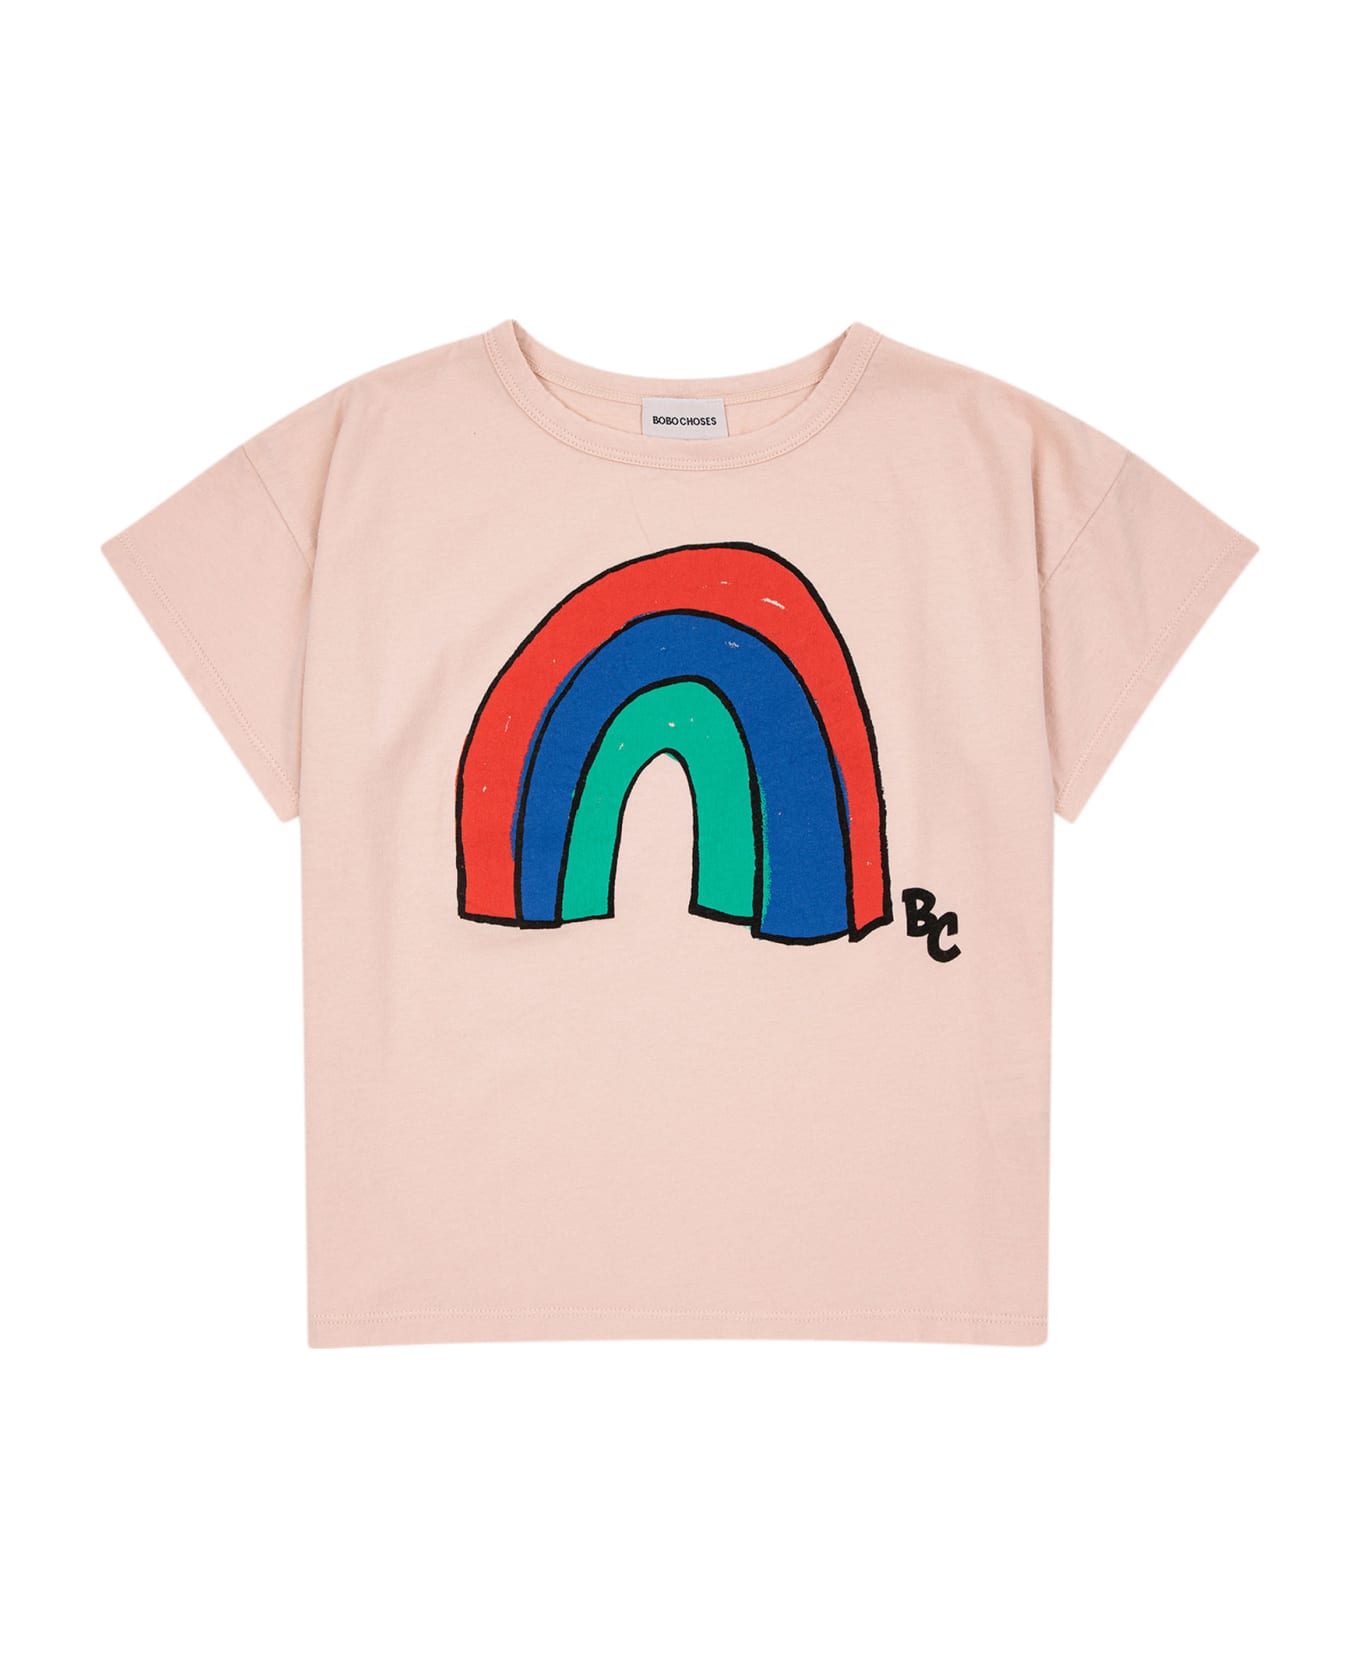 Bobo Choses Pink T-shirt For Kids With Rainbow Print - Pink